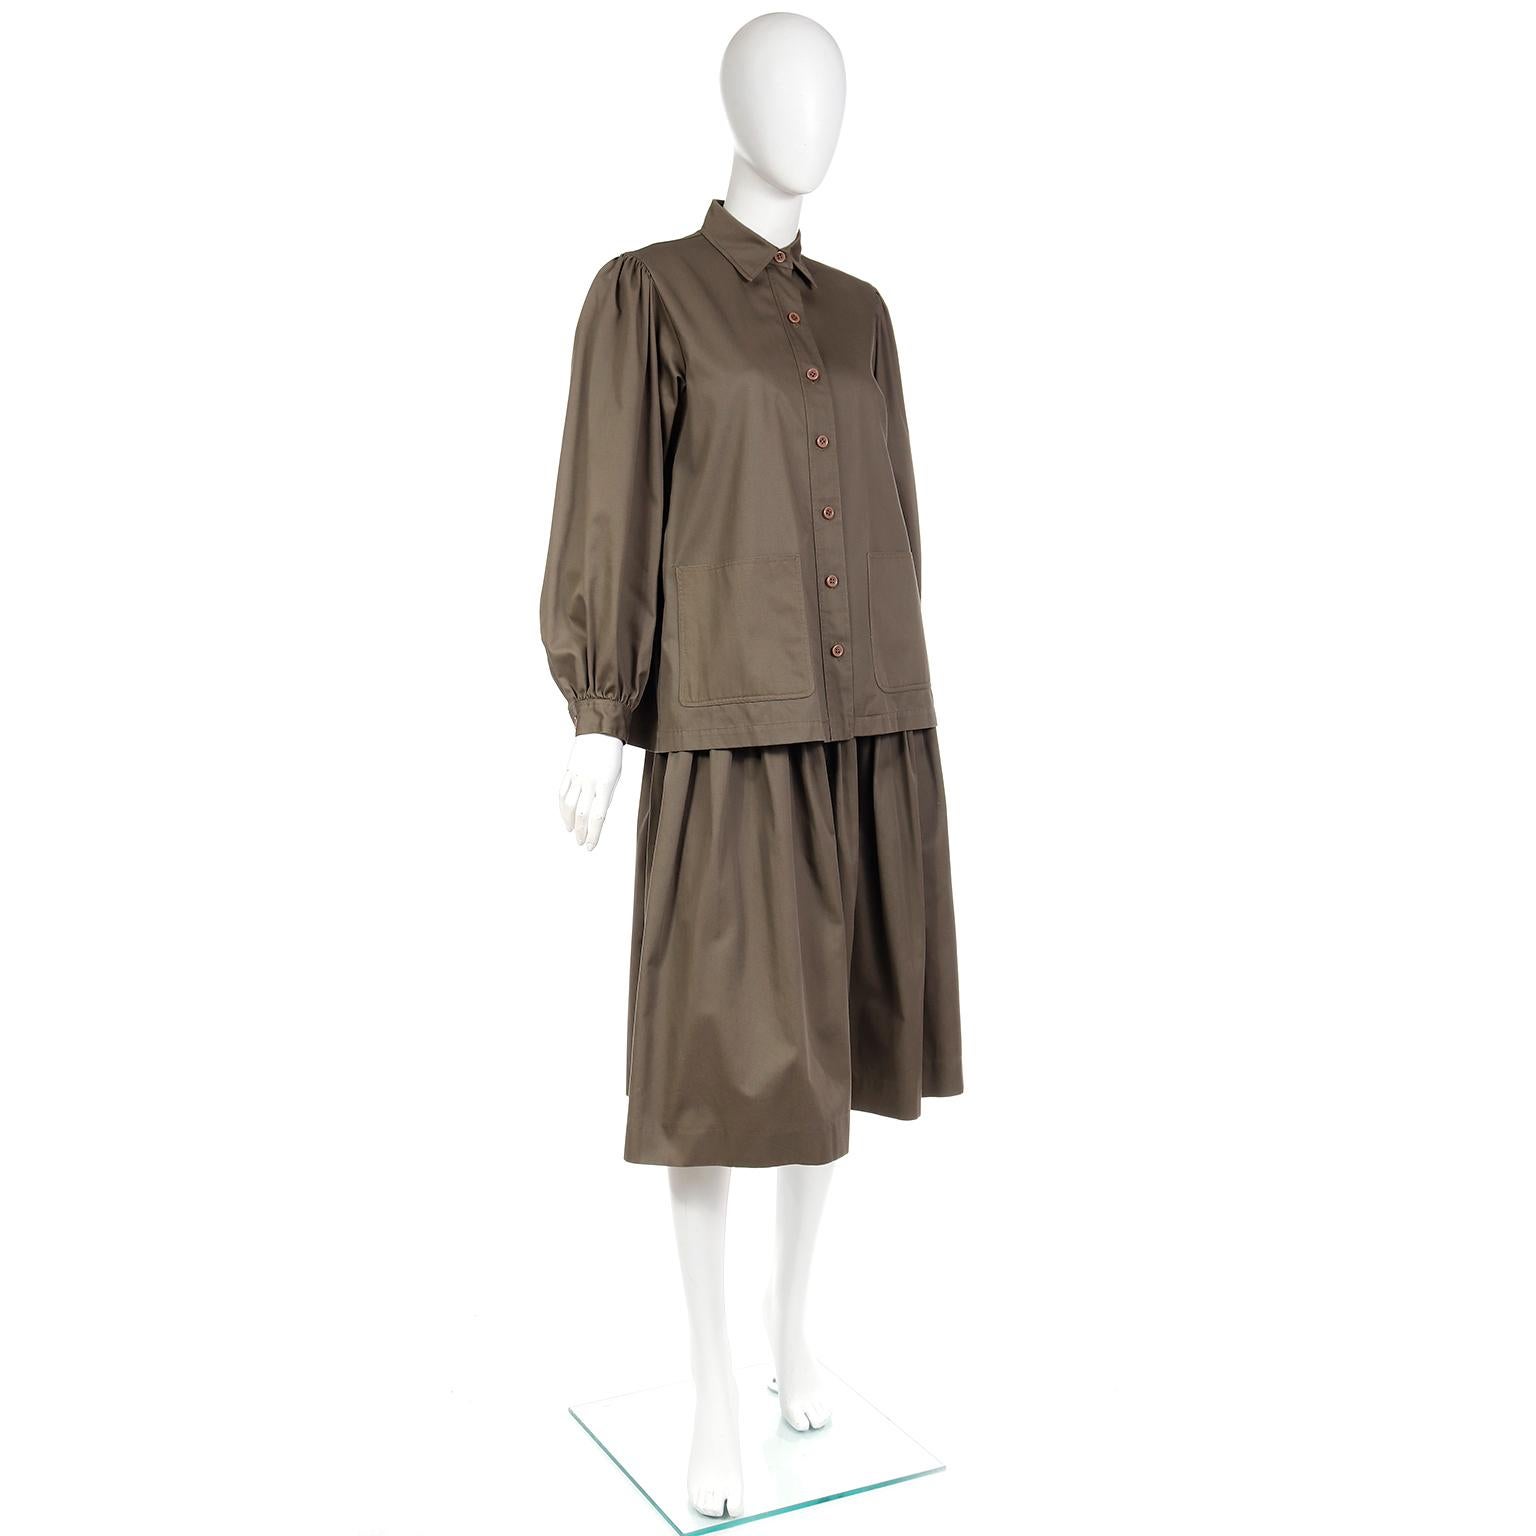 Women's Yves Saint Laurent Green 2 Piece Jacket Style Oversized Blouse & Skirt Outfit